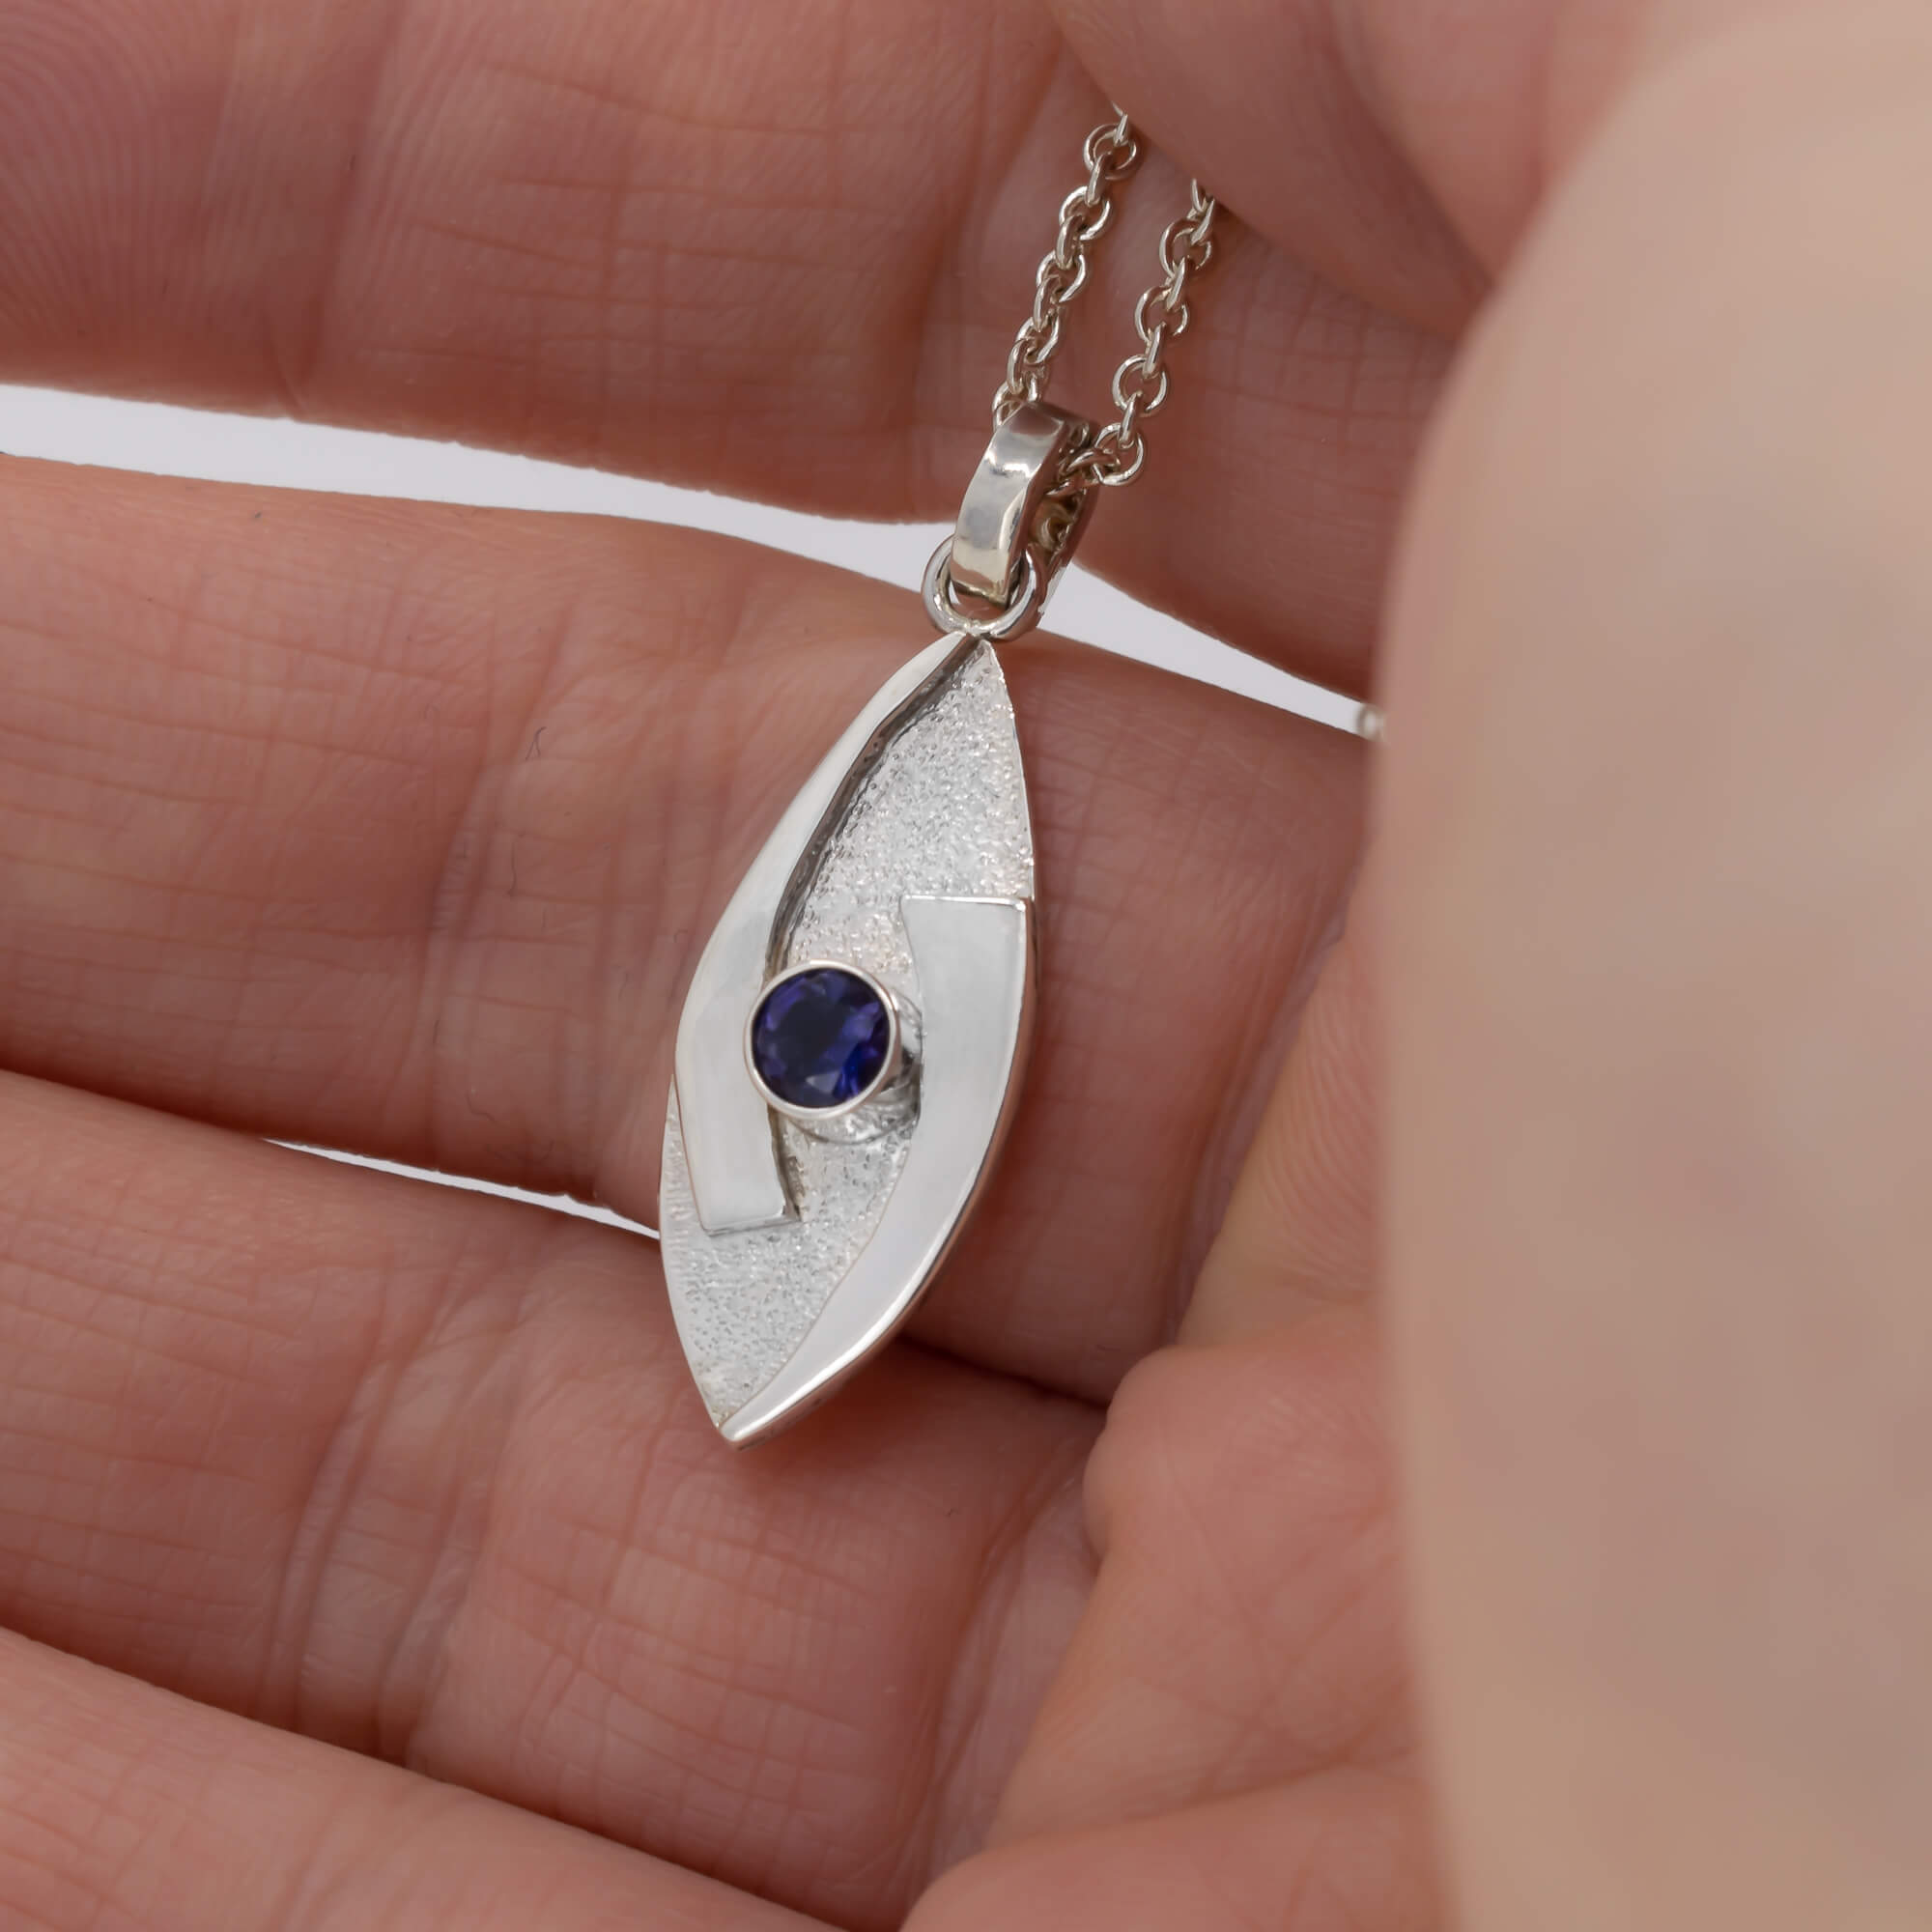 small hugged pendant necklace in sterling silver with a stardust texture and a 4mm Iolite  faceted stone shown in hand for scale